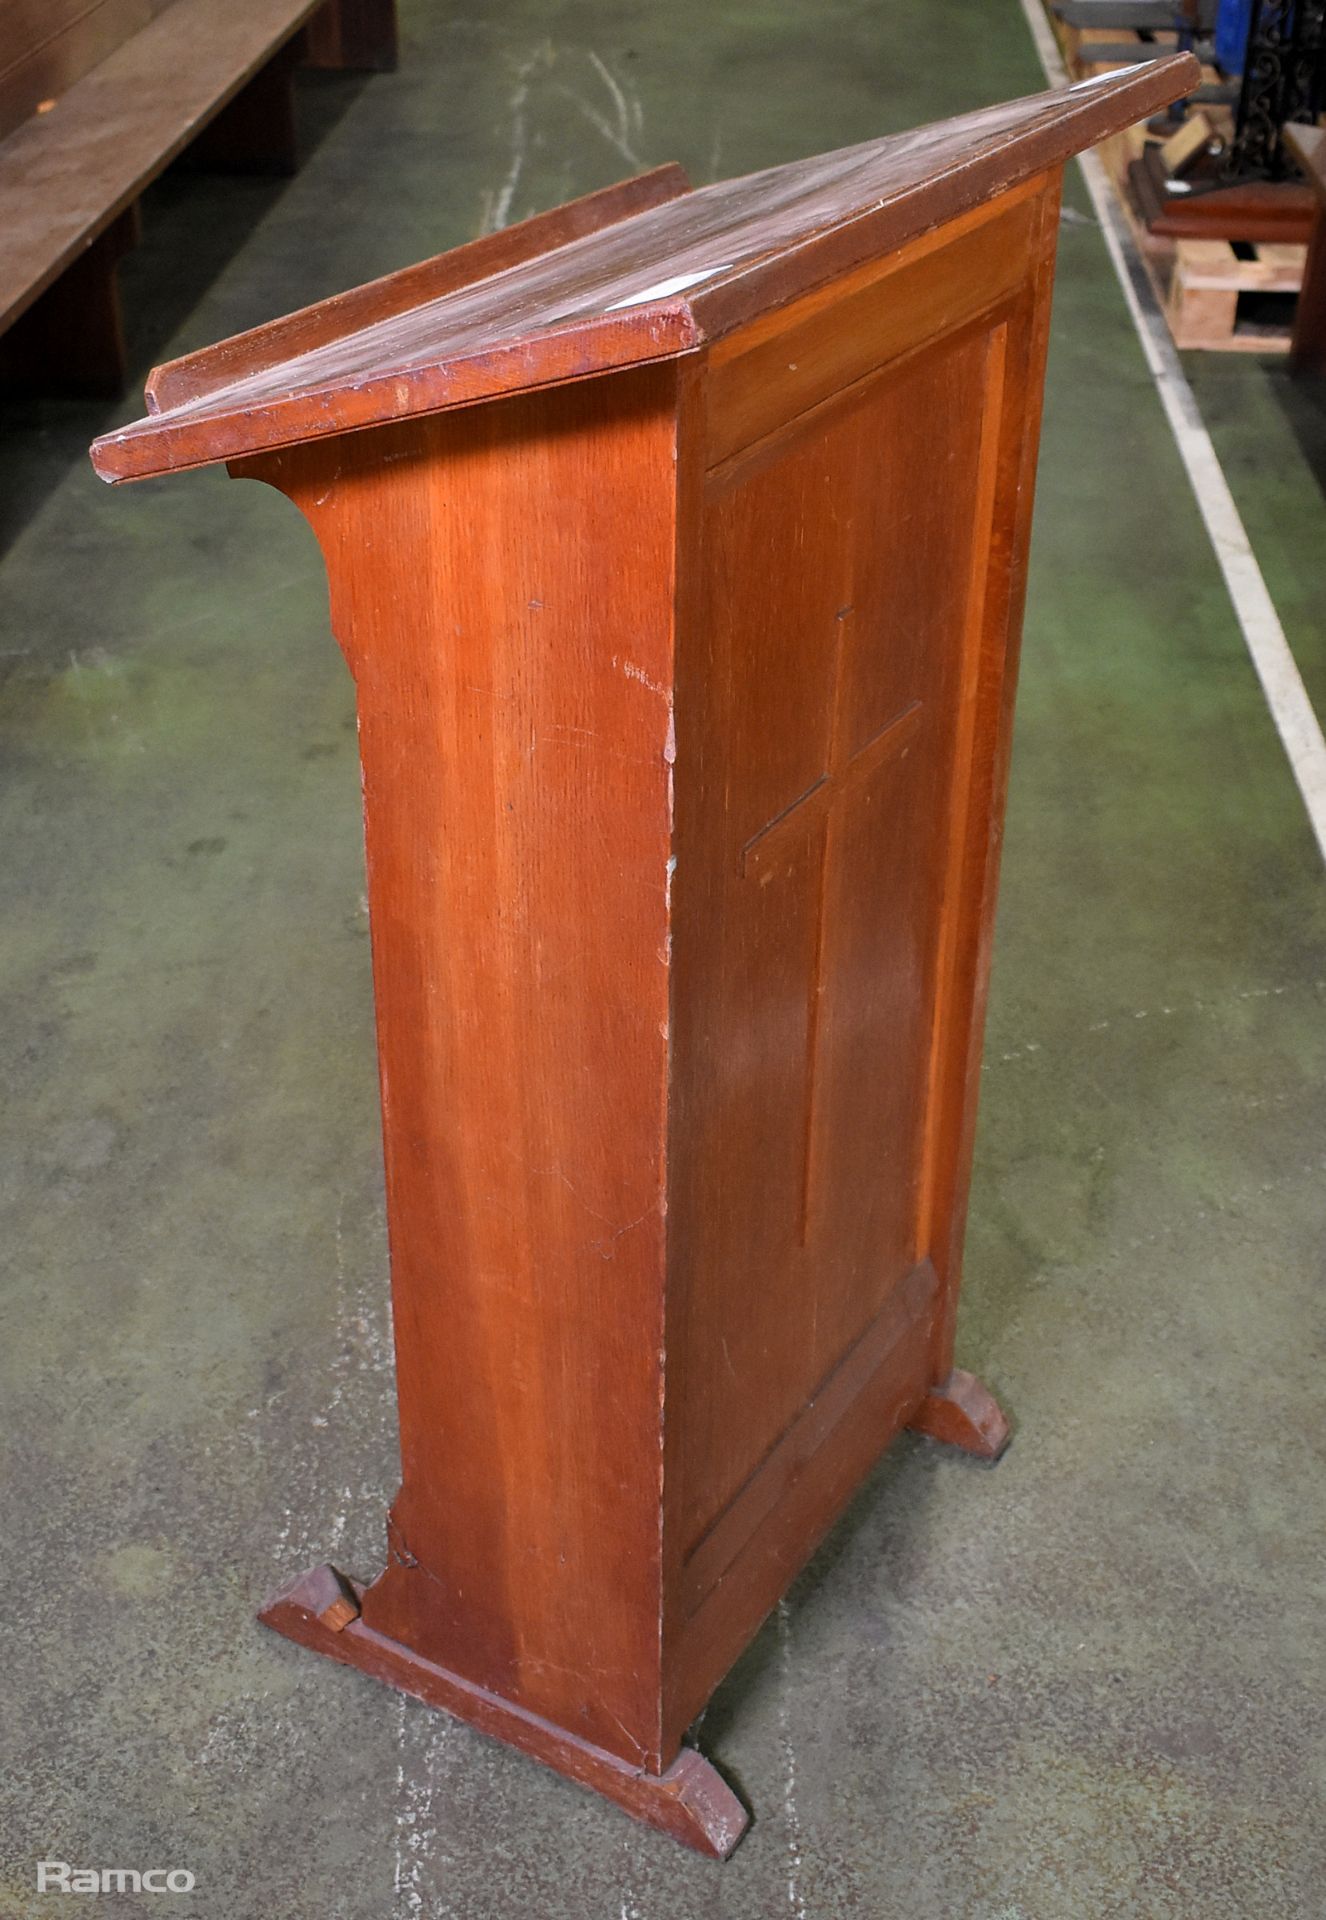 Wooden lectern - L 610 x W 400 x H 1070mm - Image 6 of 6